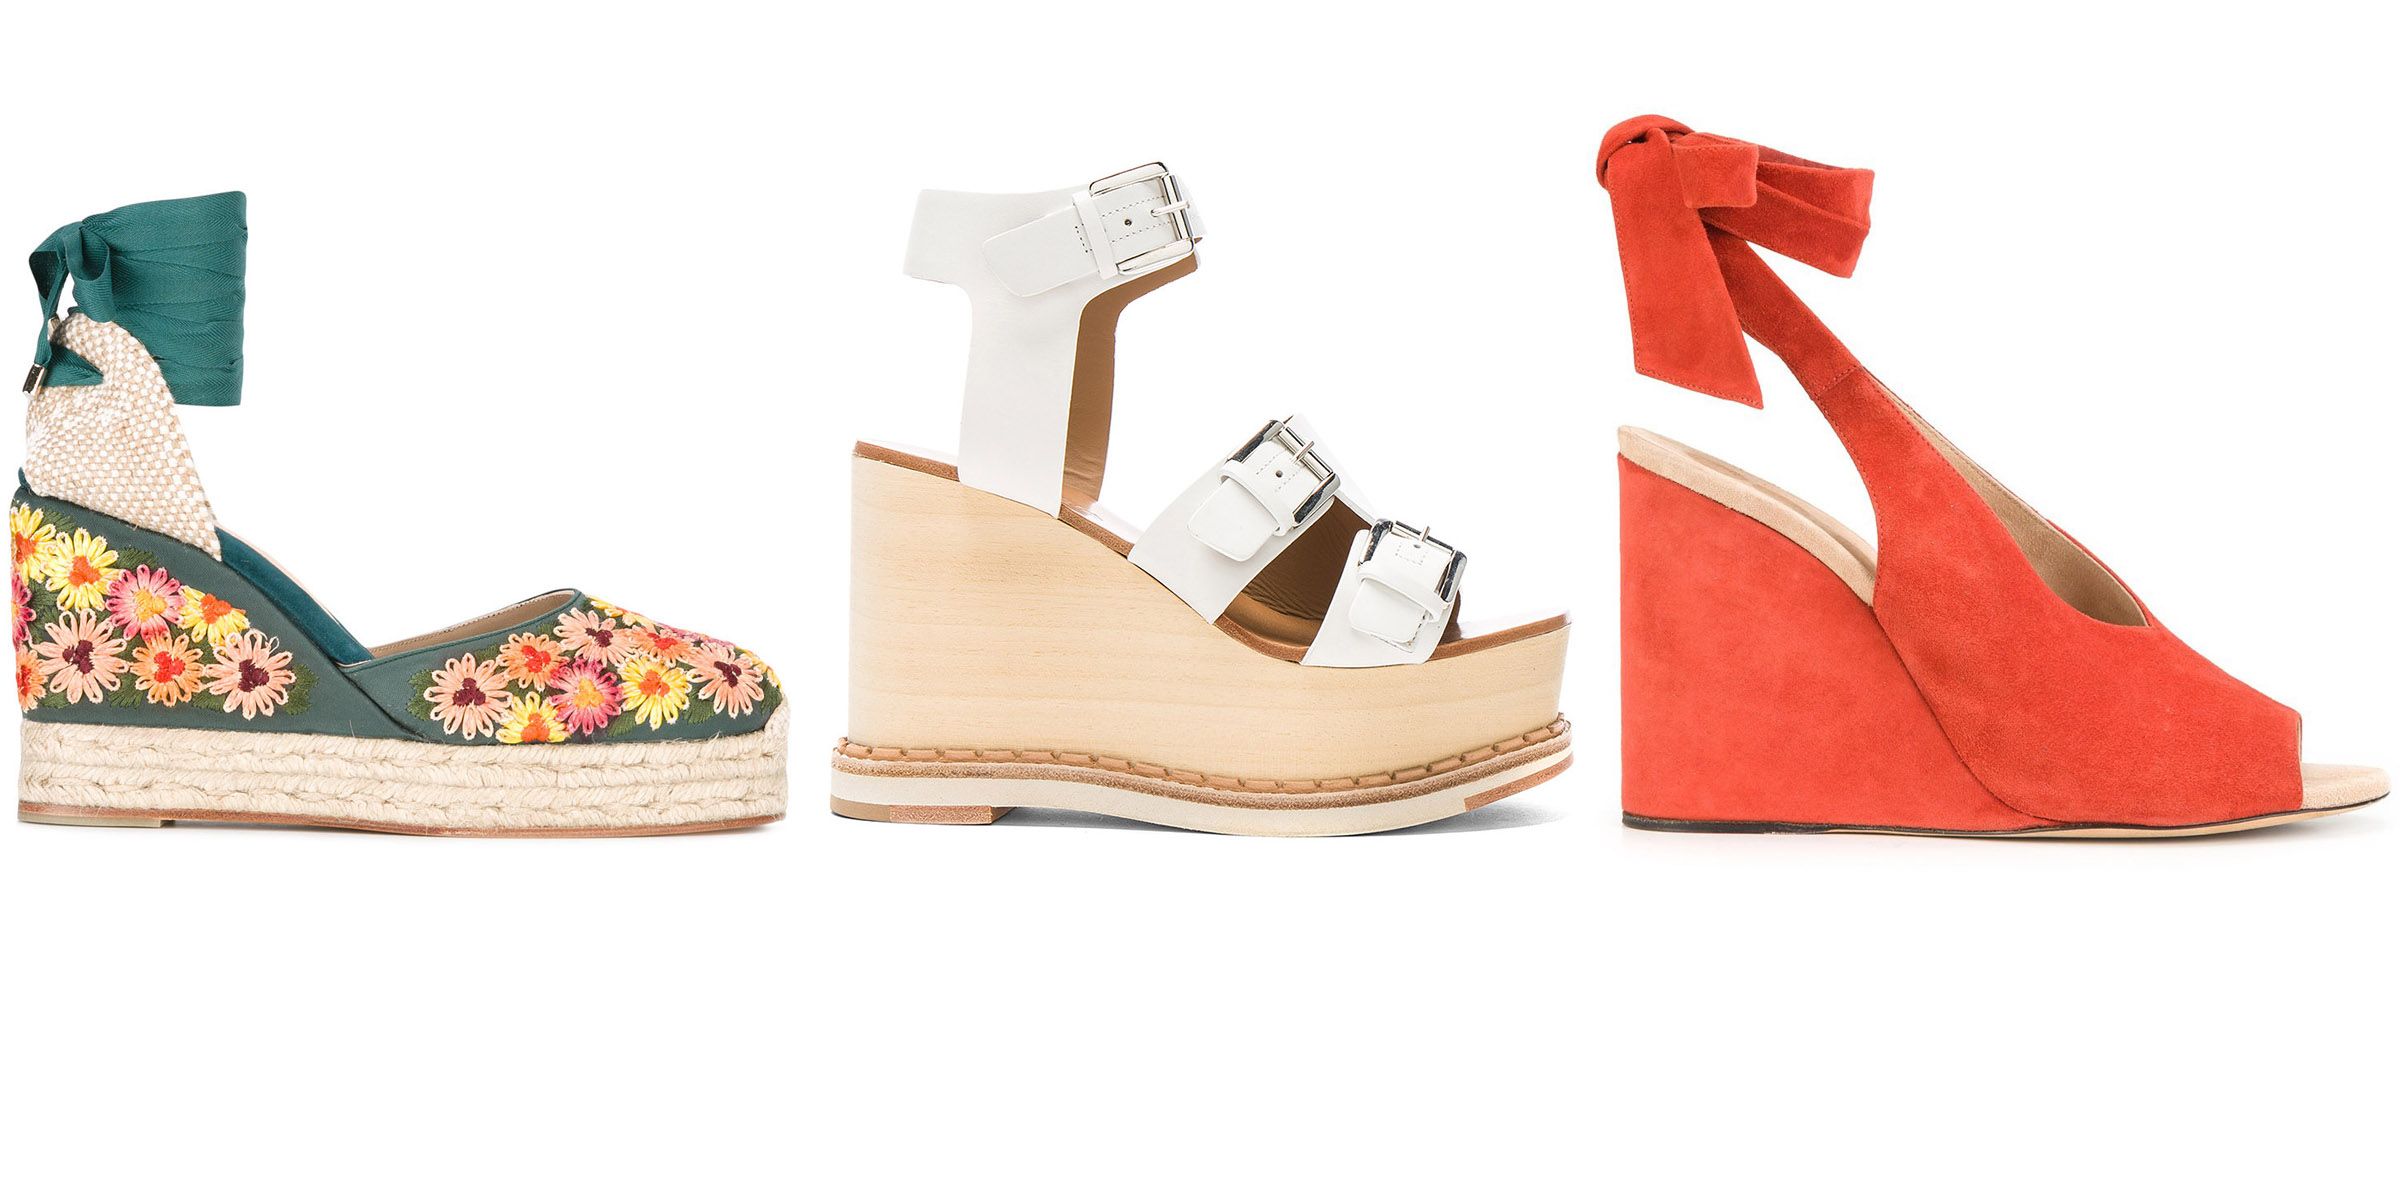 How To Style Fashionable Espadrilles Wedges Outfits in 6 Different